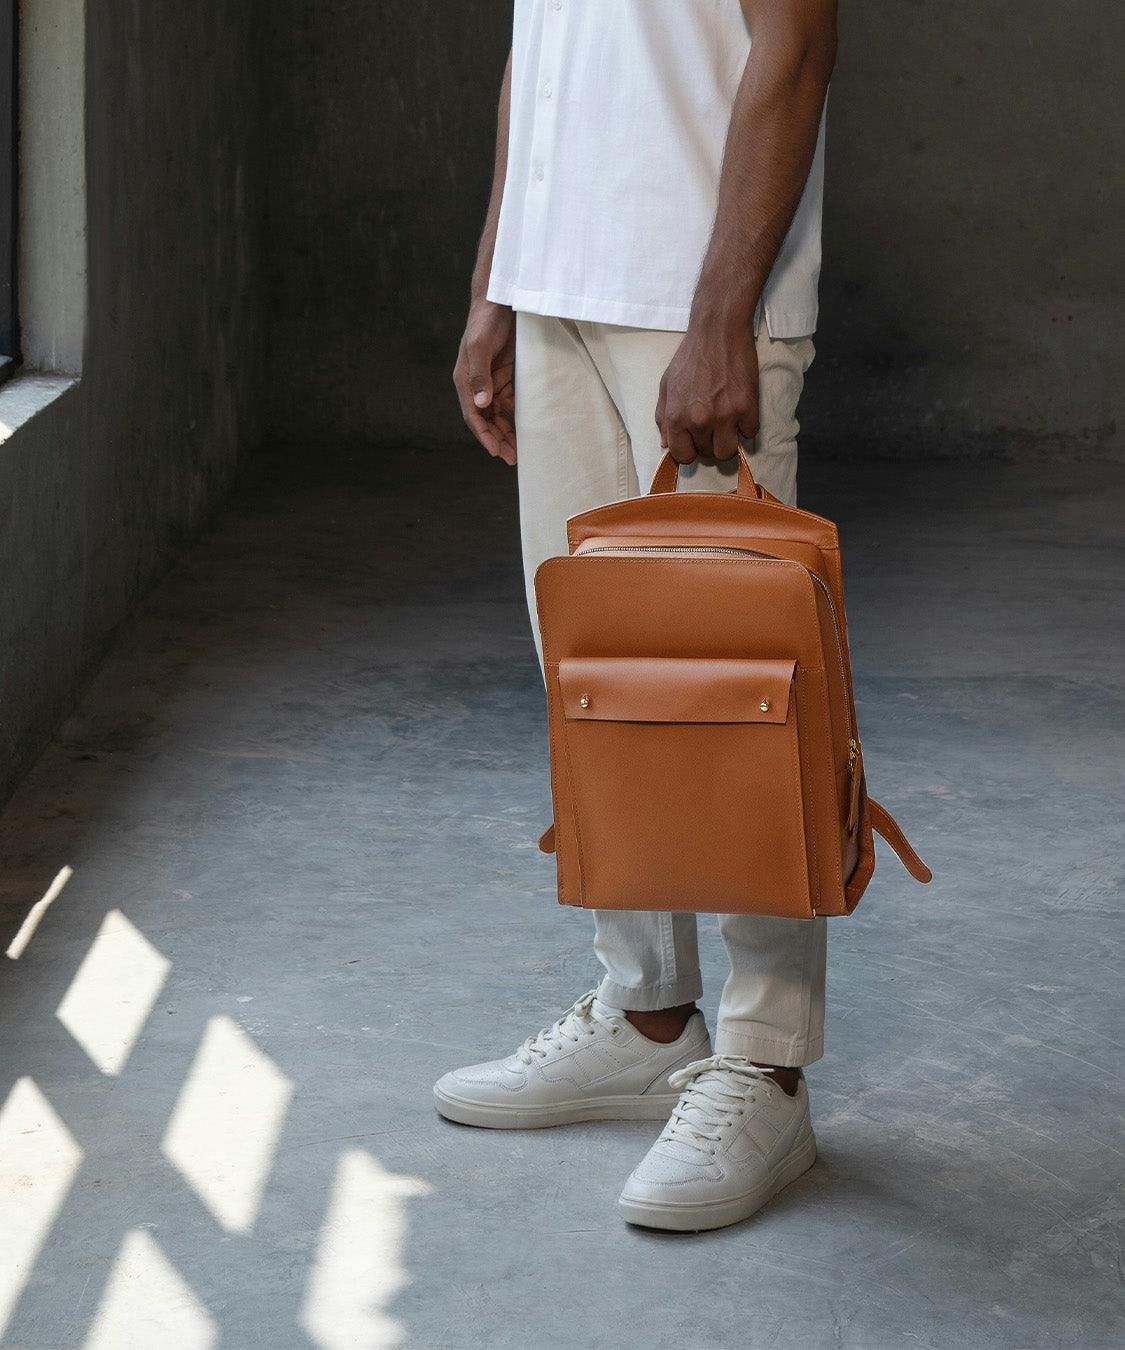 ADLER BACKPACK - Tan, a product by Kelby Huston